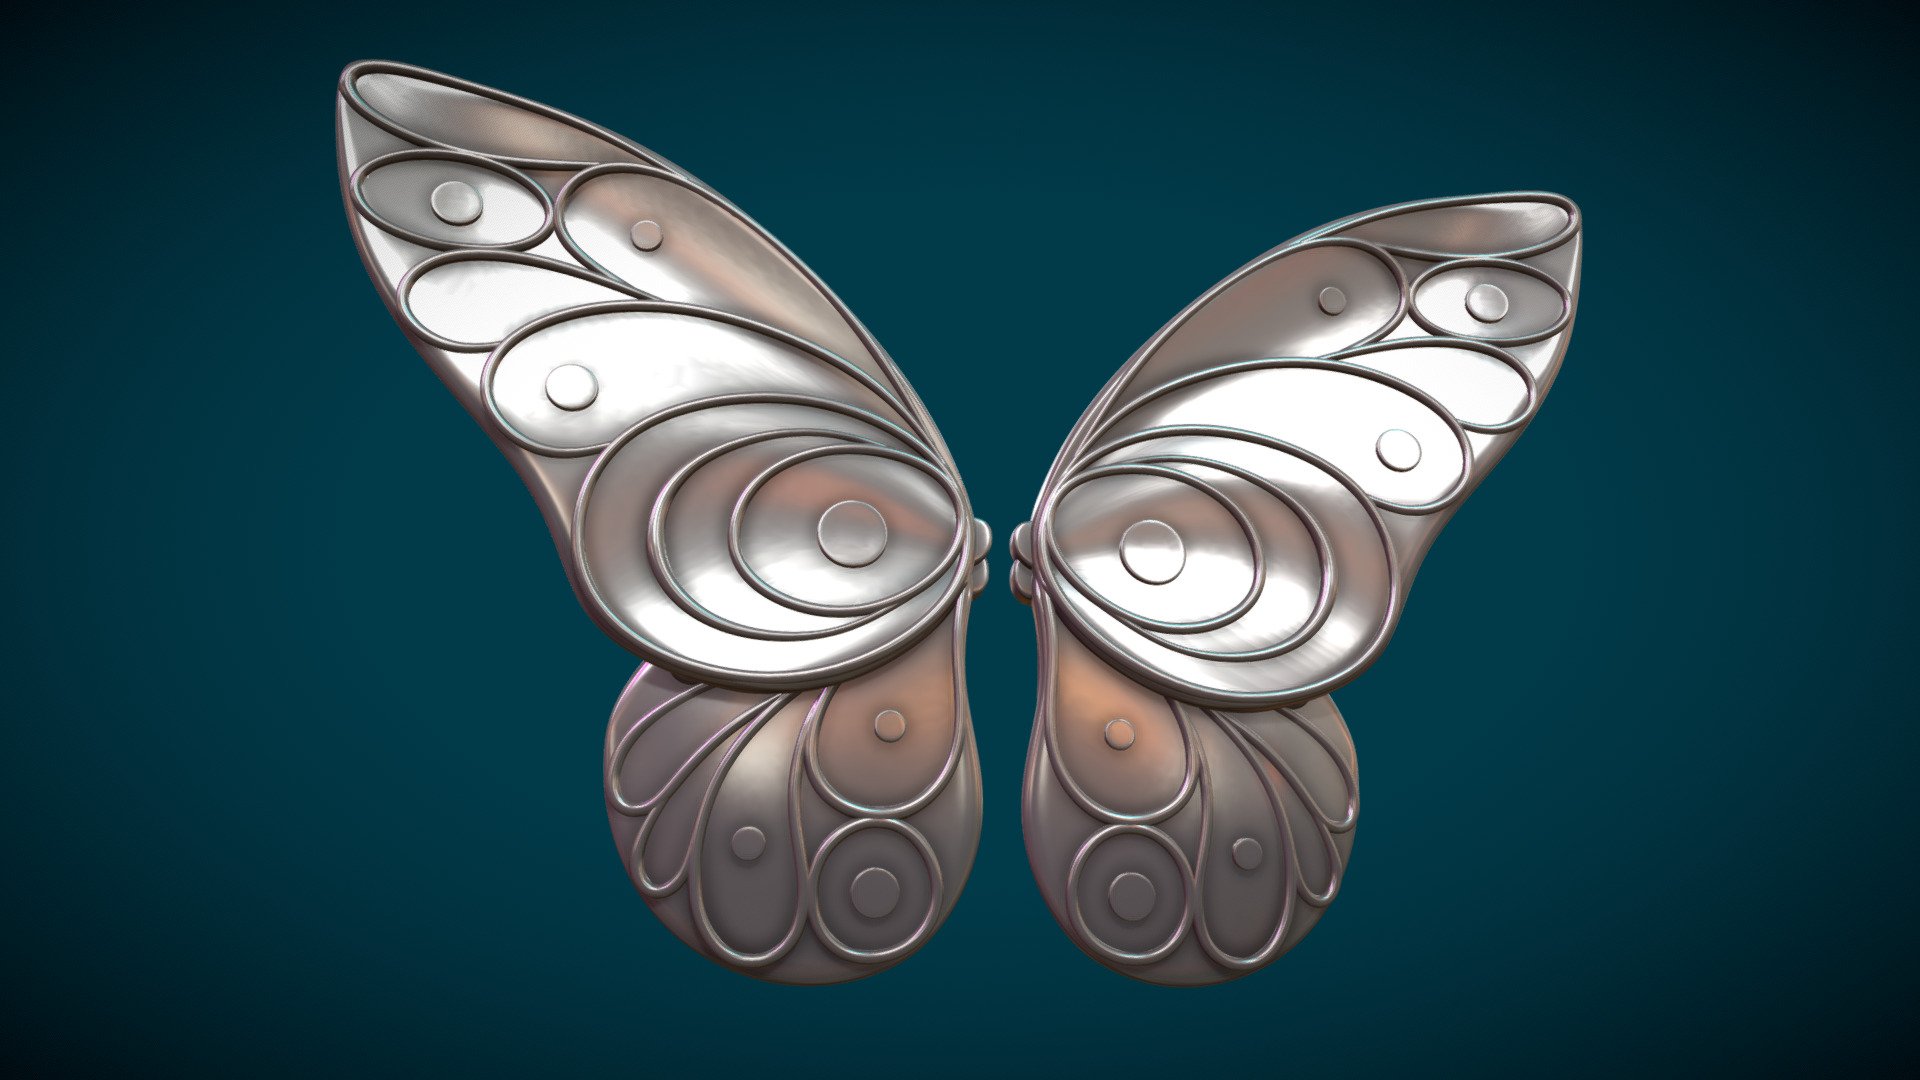 Print ready Butterfly Wings.

Measure units are millimeters, the model is about 33 mm in height.

Mesh is manifold, no holes, no inverted faces, no bad contiguous edges.

Available formats: .blend, .stl, .obj, .fbx, .dae

Here is two versions of the model:
1) BW_prts. (.blend, .stl, .obj, .fbx, .dae) Upper and lower wings are separate objects. 
2) Btrfl_Iy_prts. (.blend, .stl, .obj, .fbx, .dae) Up and lower wings are booled into solid objects. Here are 519044
 triangular faces 3d model